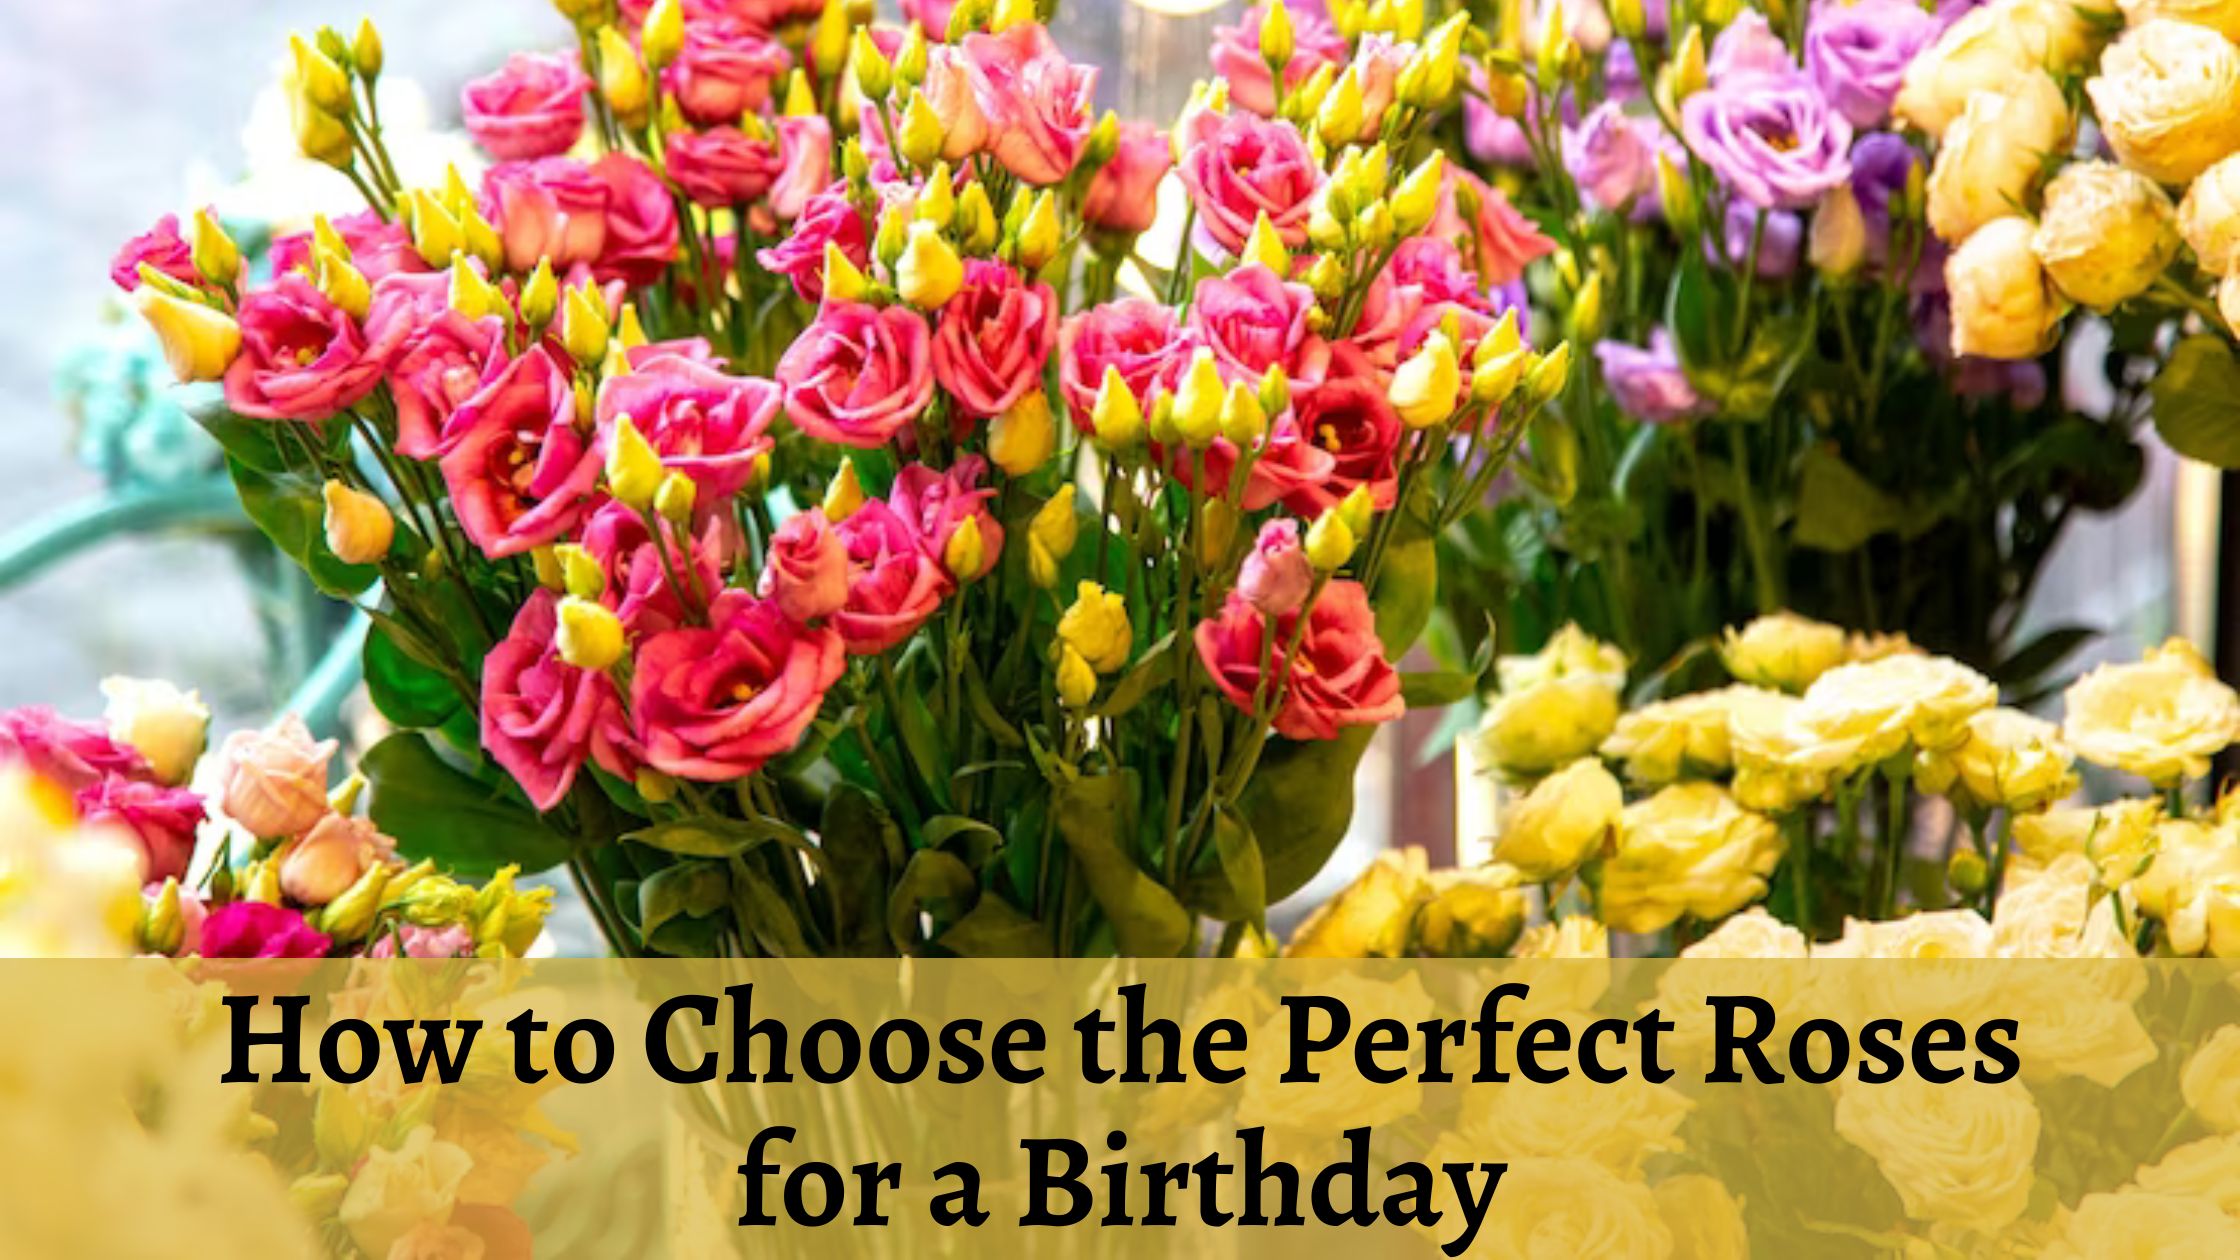 How to Choose the Perfect Roses for a Birthday